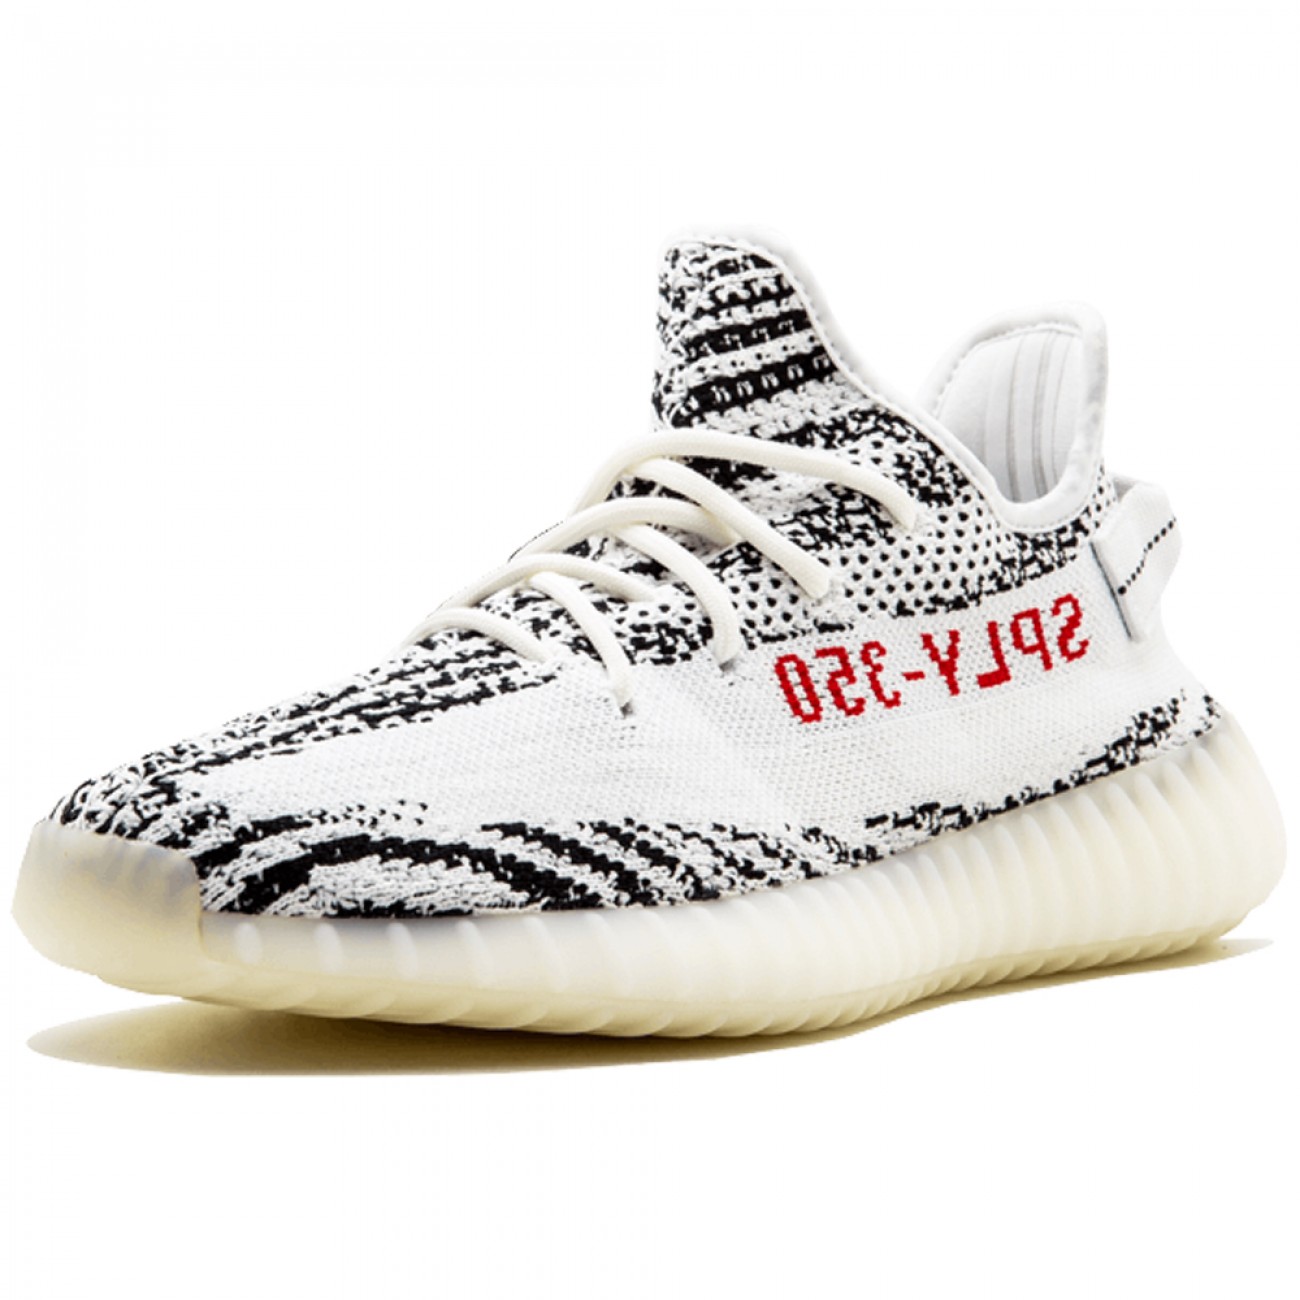 Adidas Yeezy Boost 350 V2 Zebra Cp9654 Outfit 2018 Release Date (2) - newkick.org